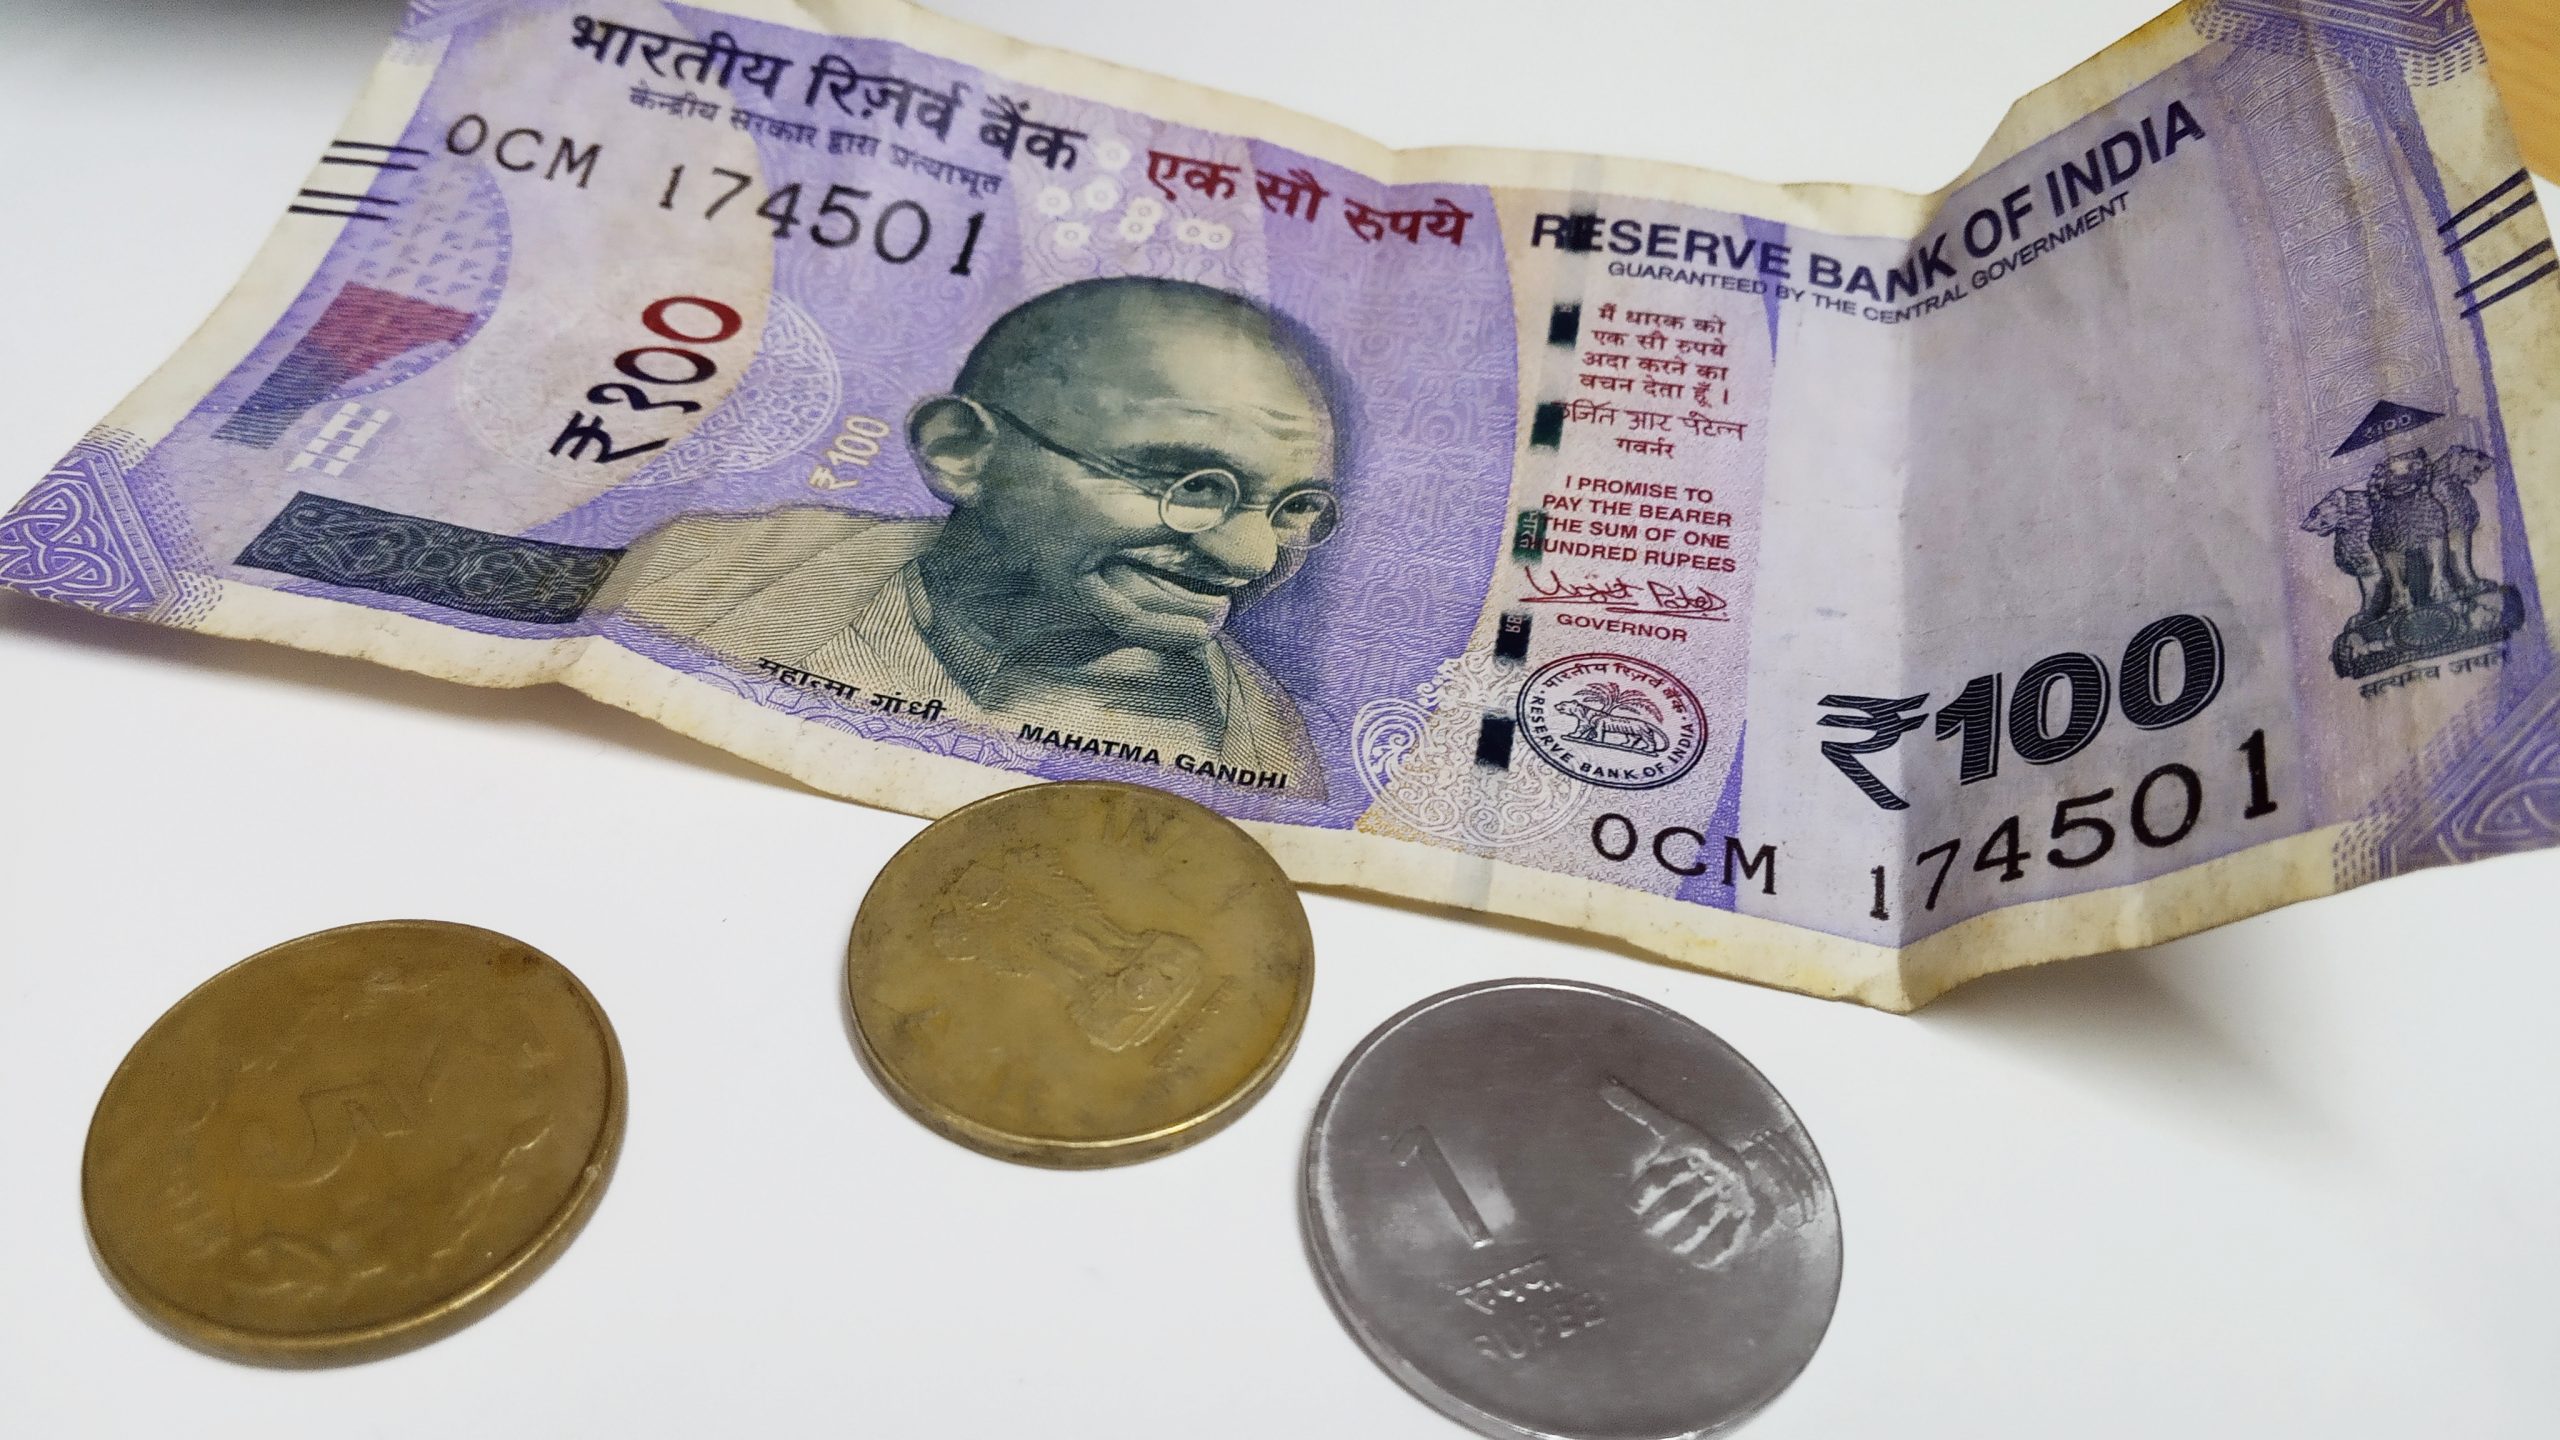 Indian coins and currency note